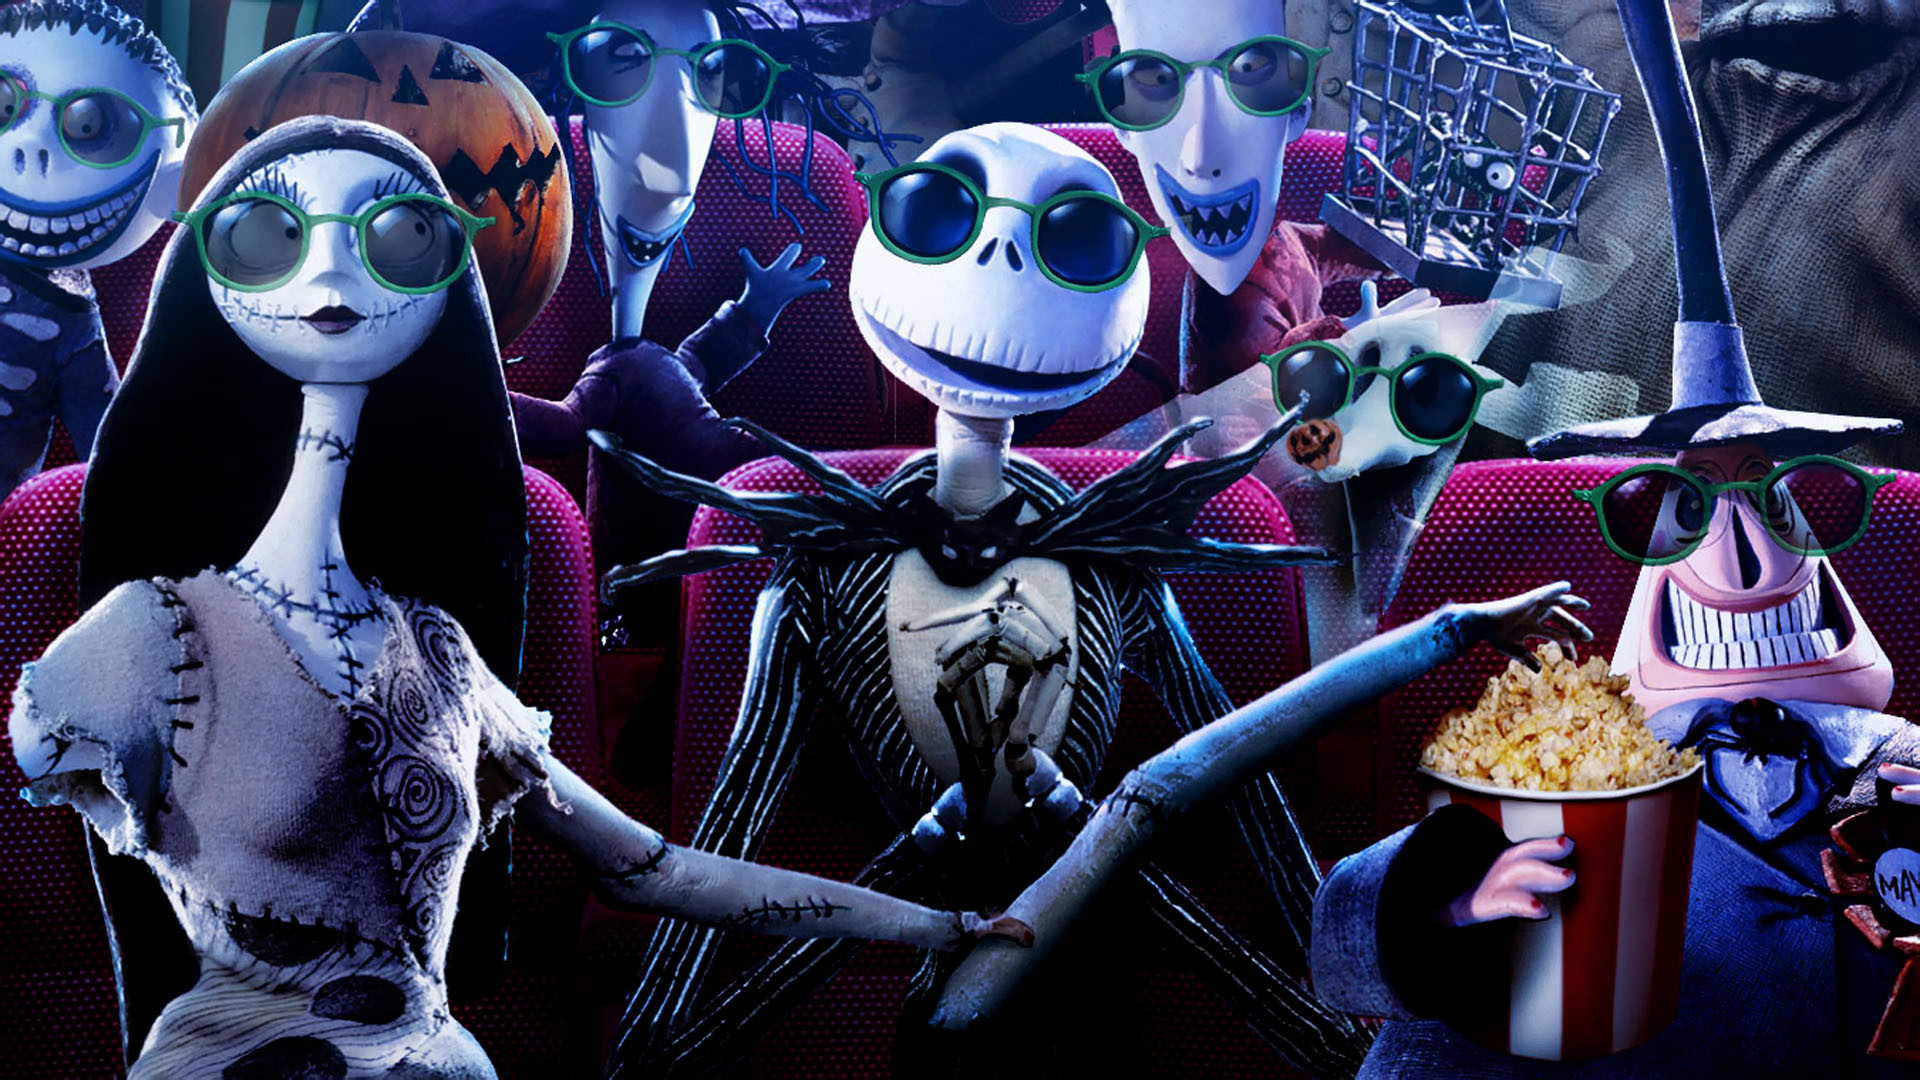 Jack and Friends Nightmare Before Christmas Wallpaper   Christmas